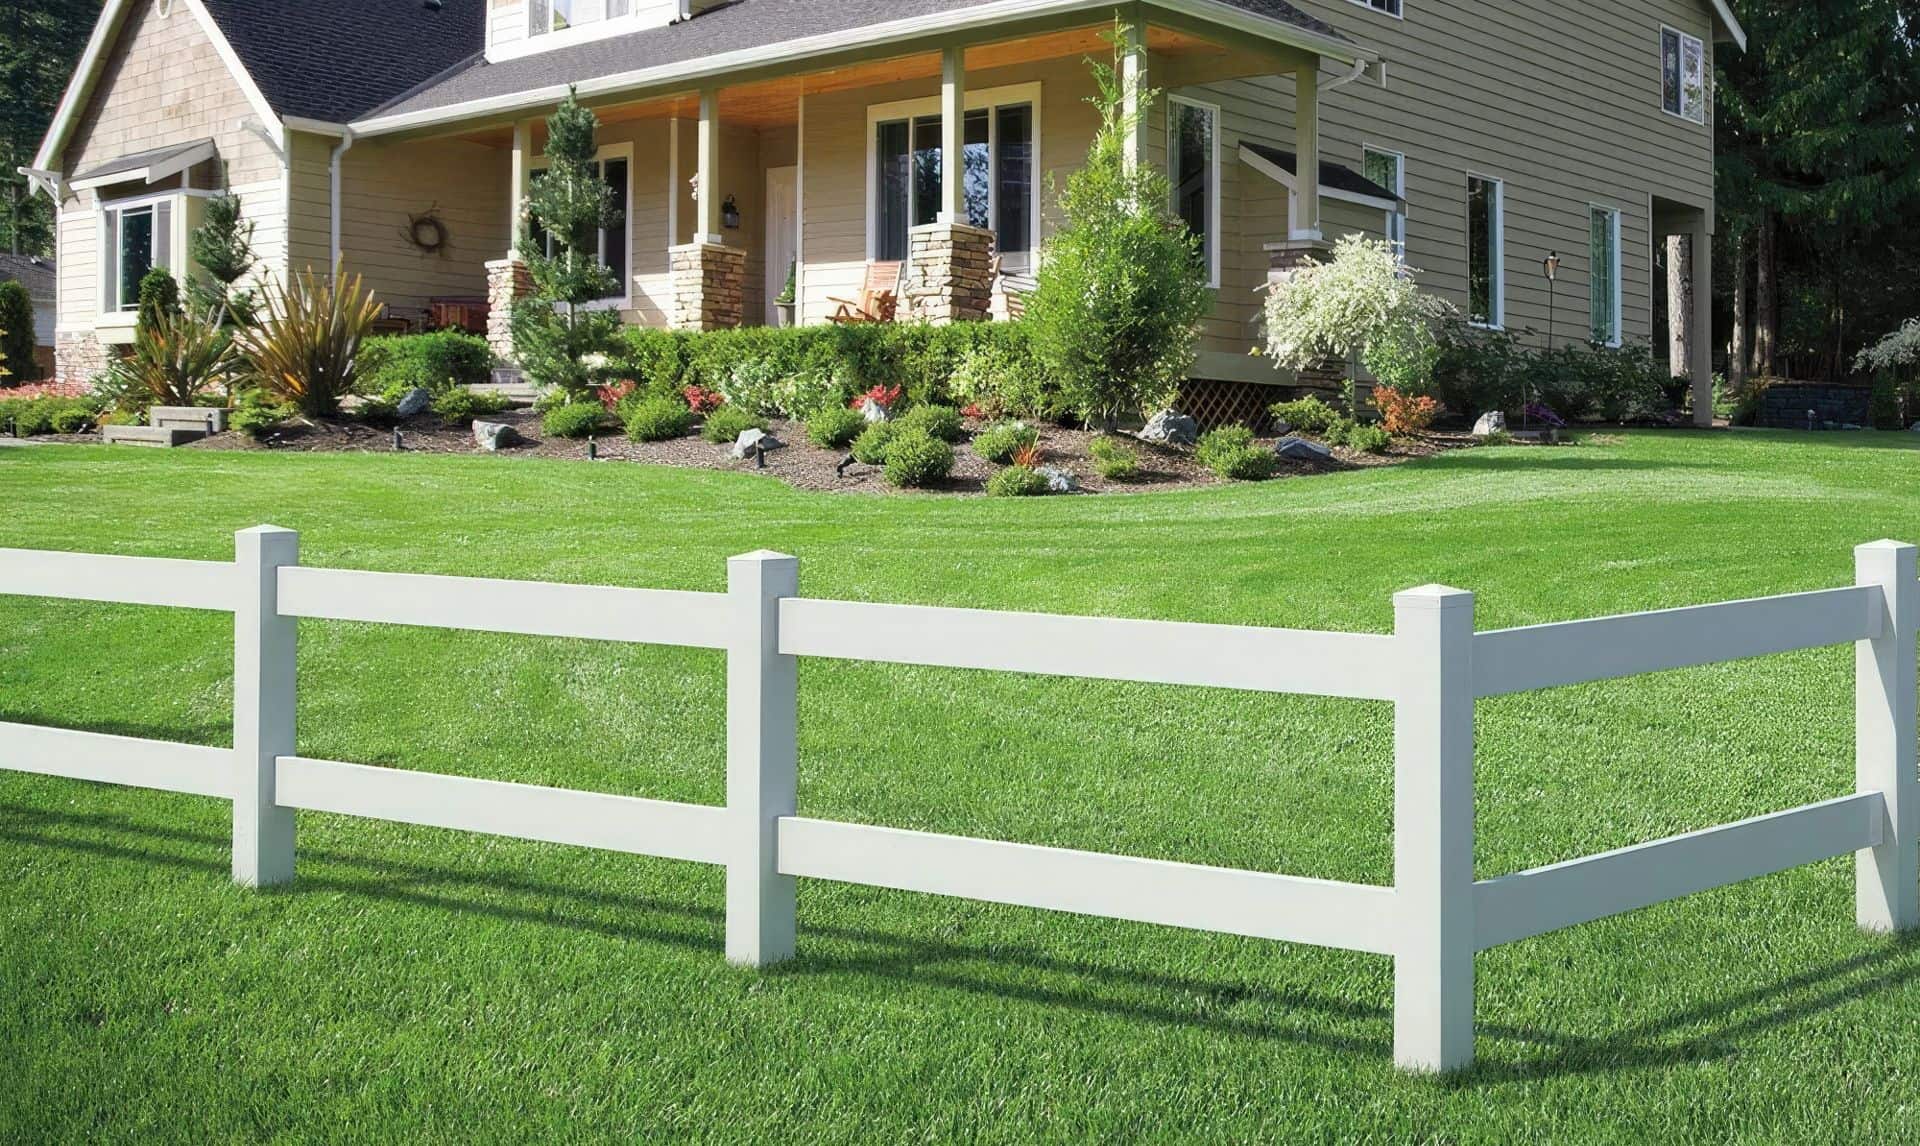 Vinyl 2-rail ranch fence surrounds suburban home in an urban setting. Grassy lawn and trees in the background